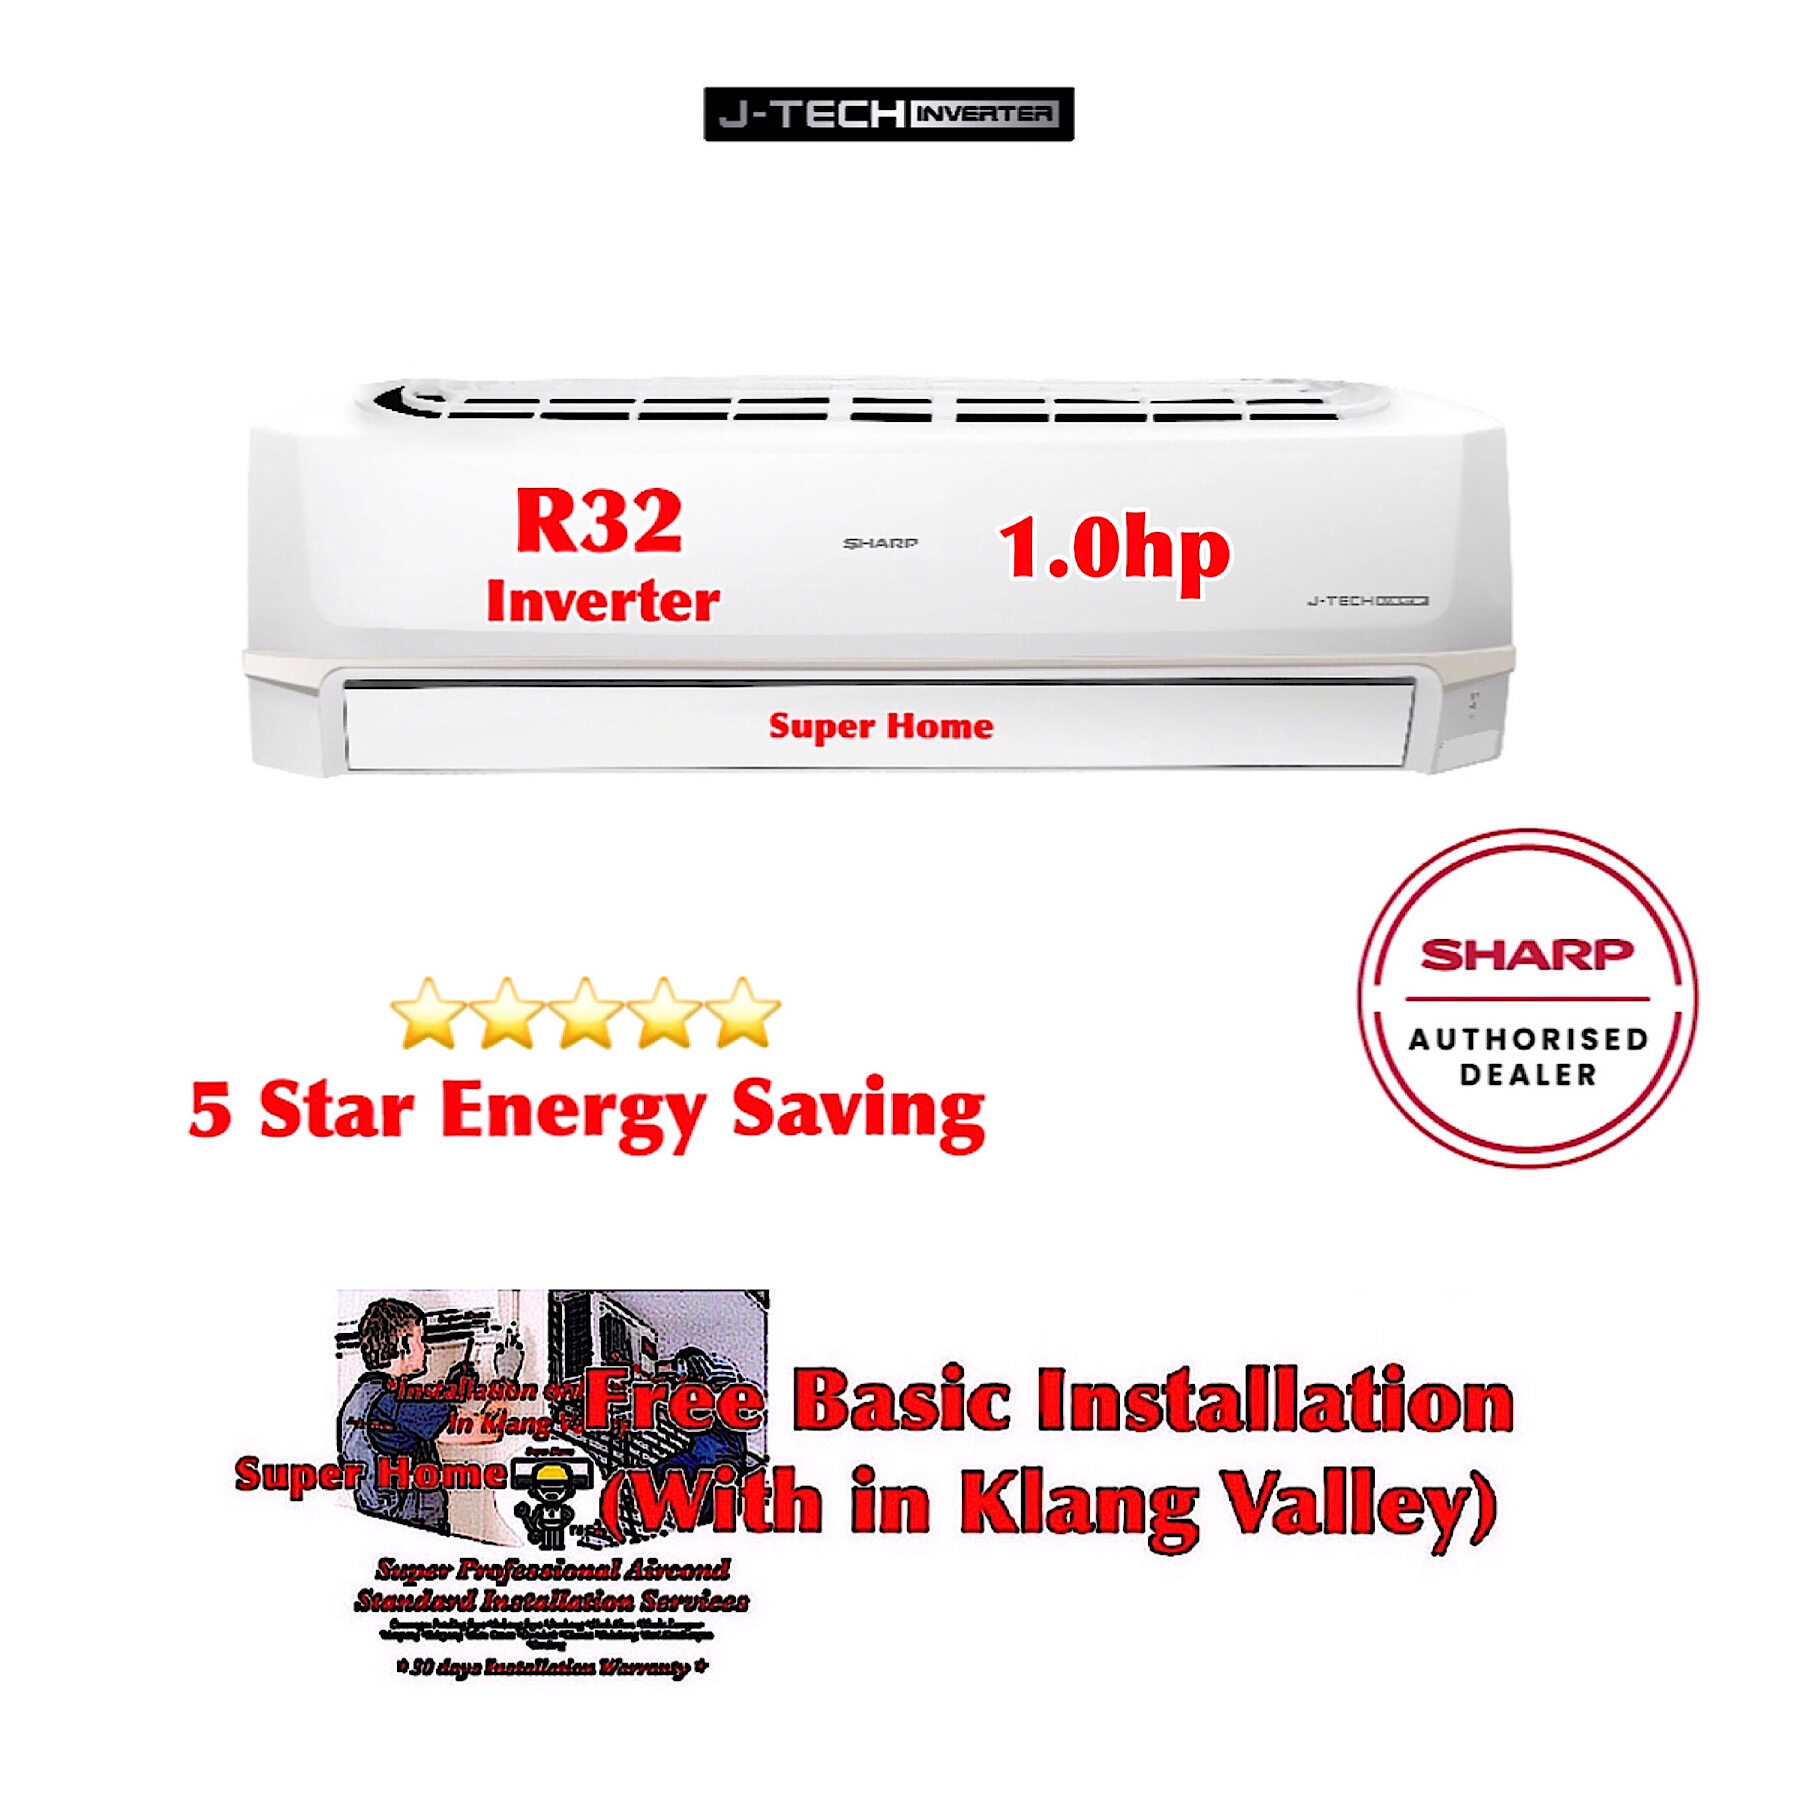 Sharp R32 J-Tech Standard Inverter Aircond AHX9VED2 & AUX9VED2 1.0hp Air Conditioner Sharp R32 Inverter Aircond Sharp 1.0hp Inverter Aircond - 5 Star Energy Saving + Basic Installation Services (Only with in Klang Valley)